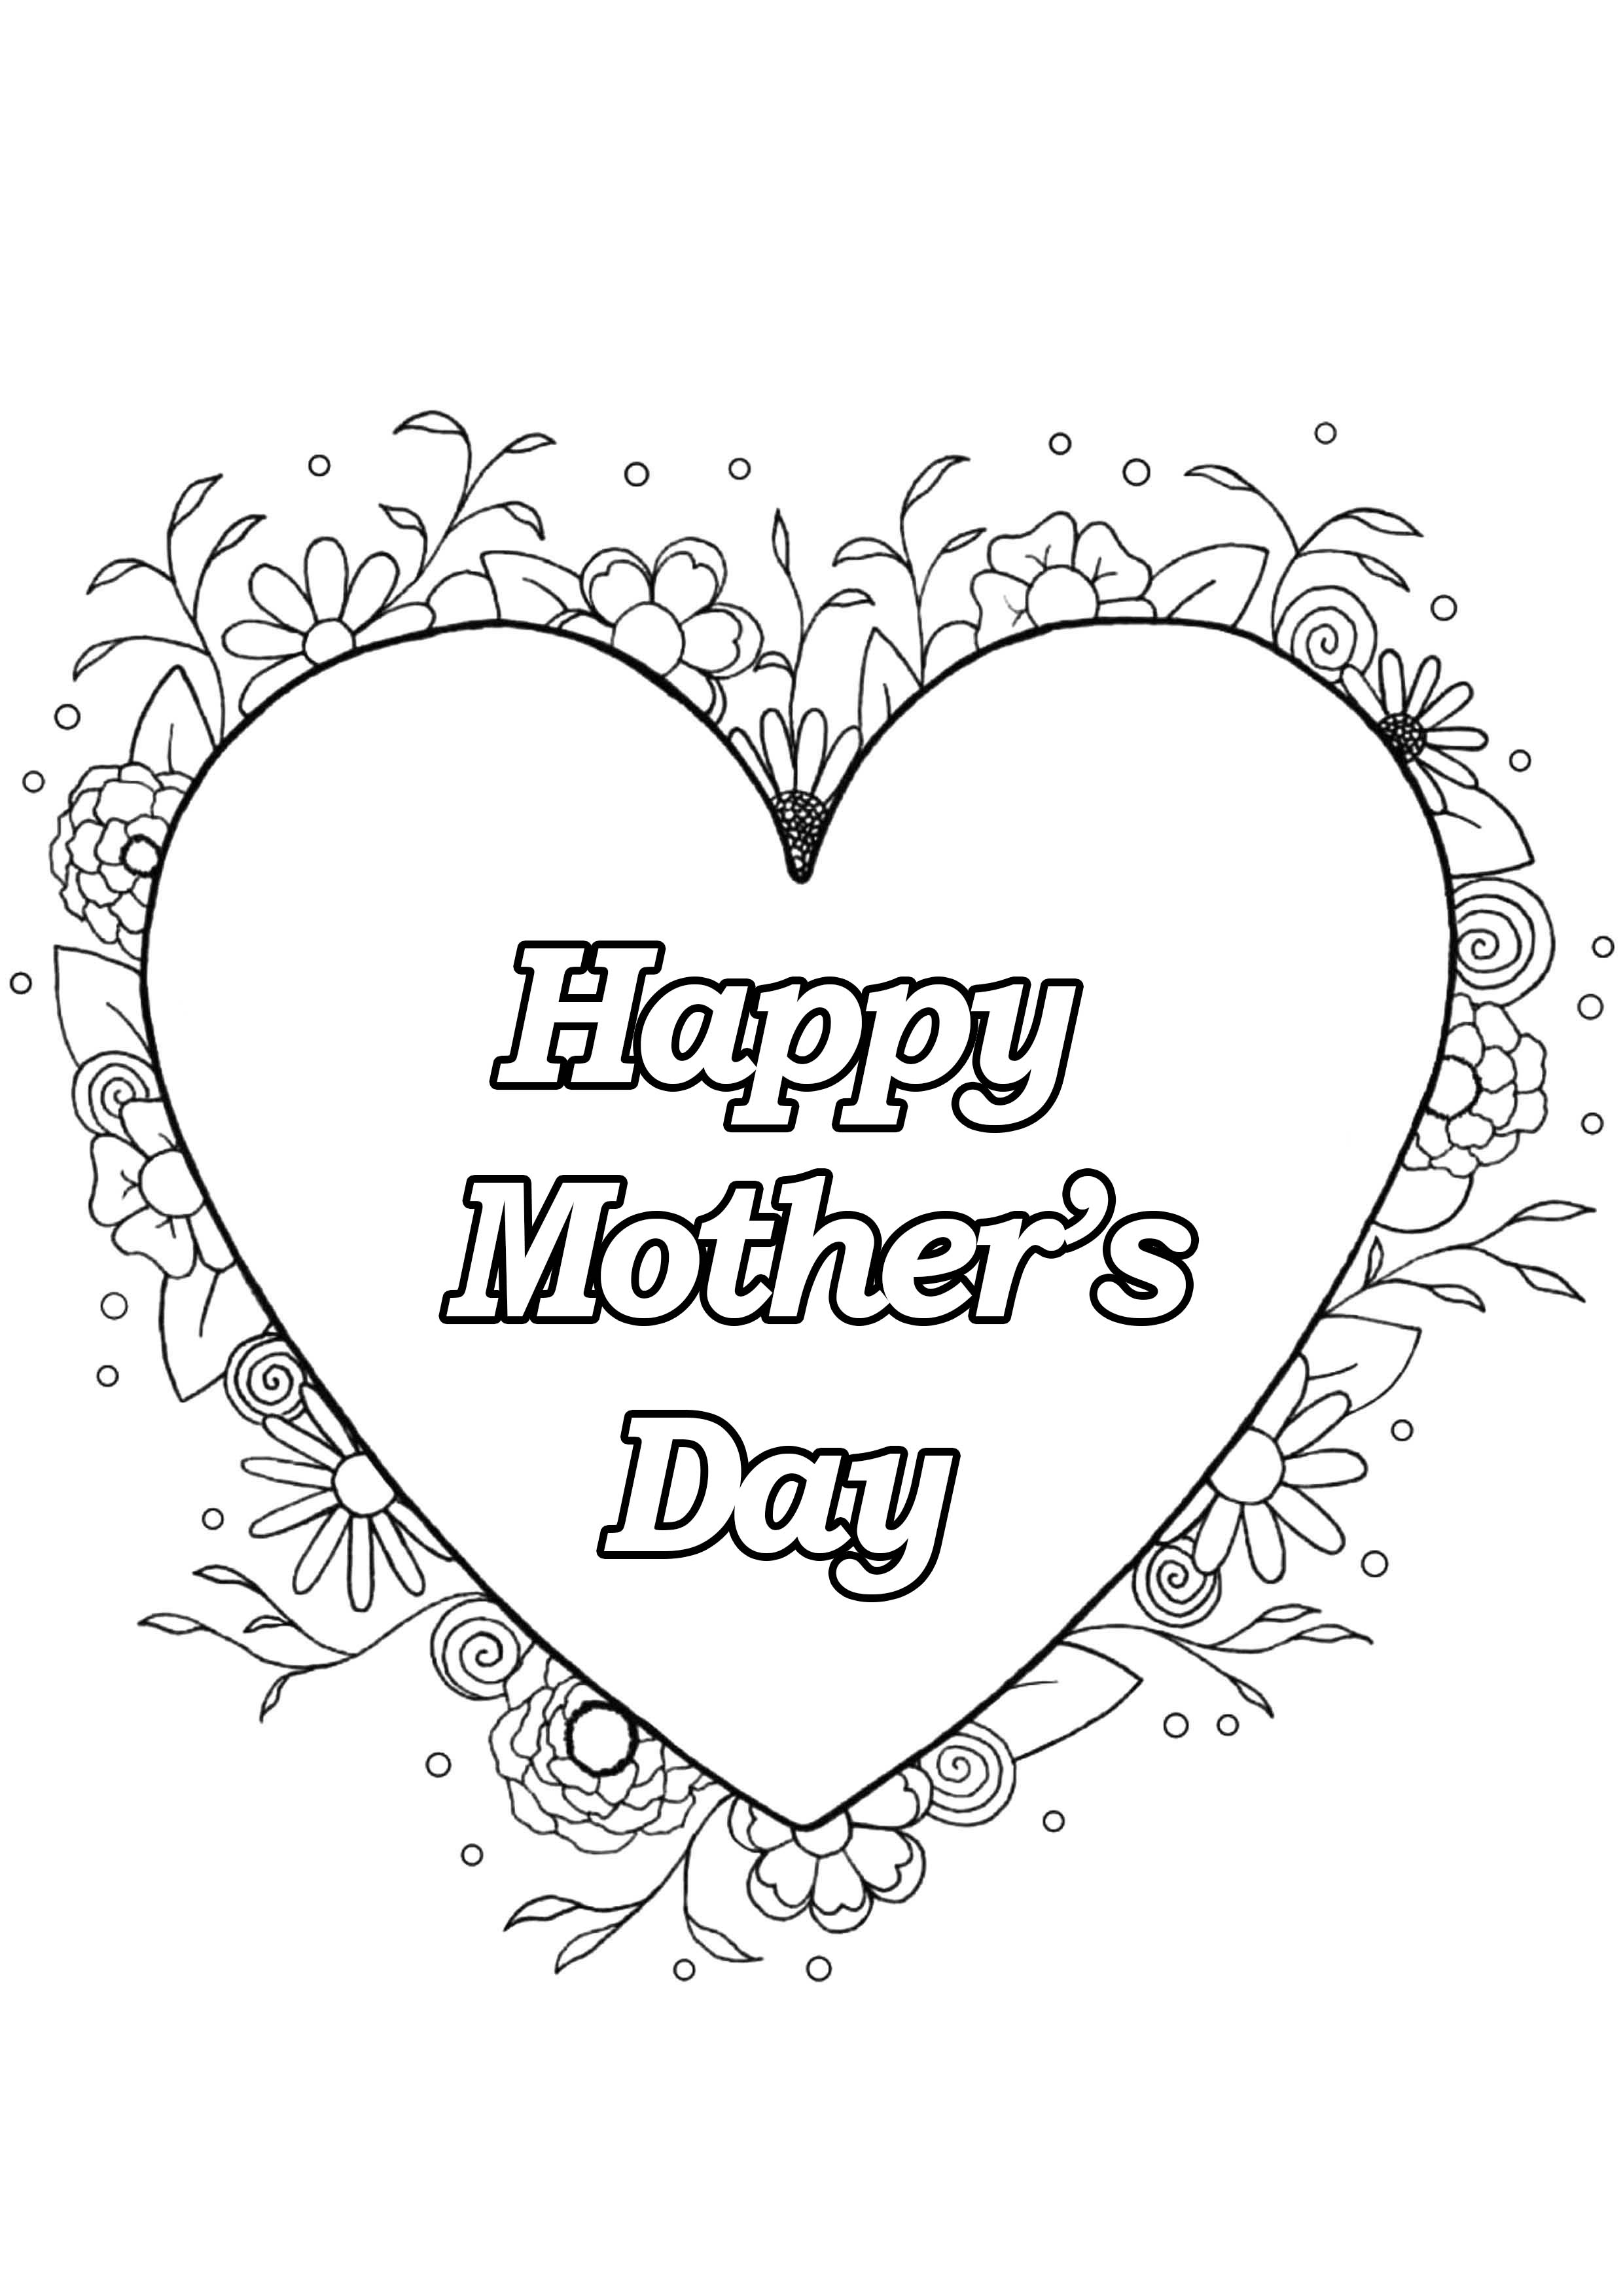 Mother's day coloring page : Heart & Flowers